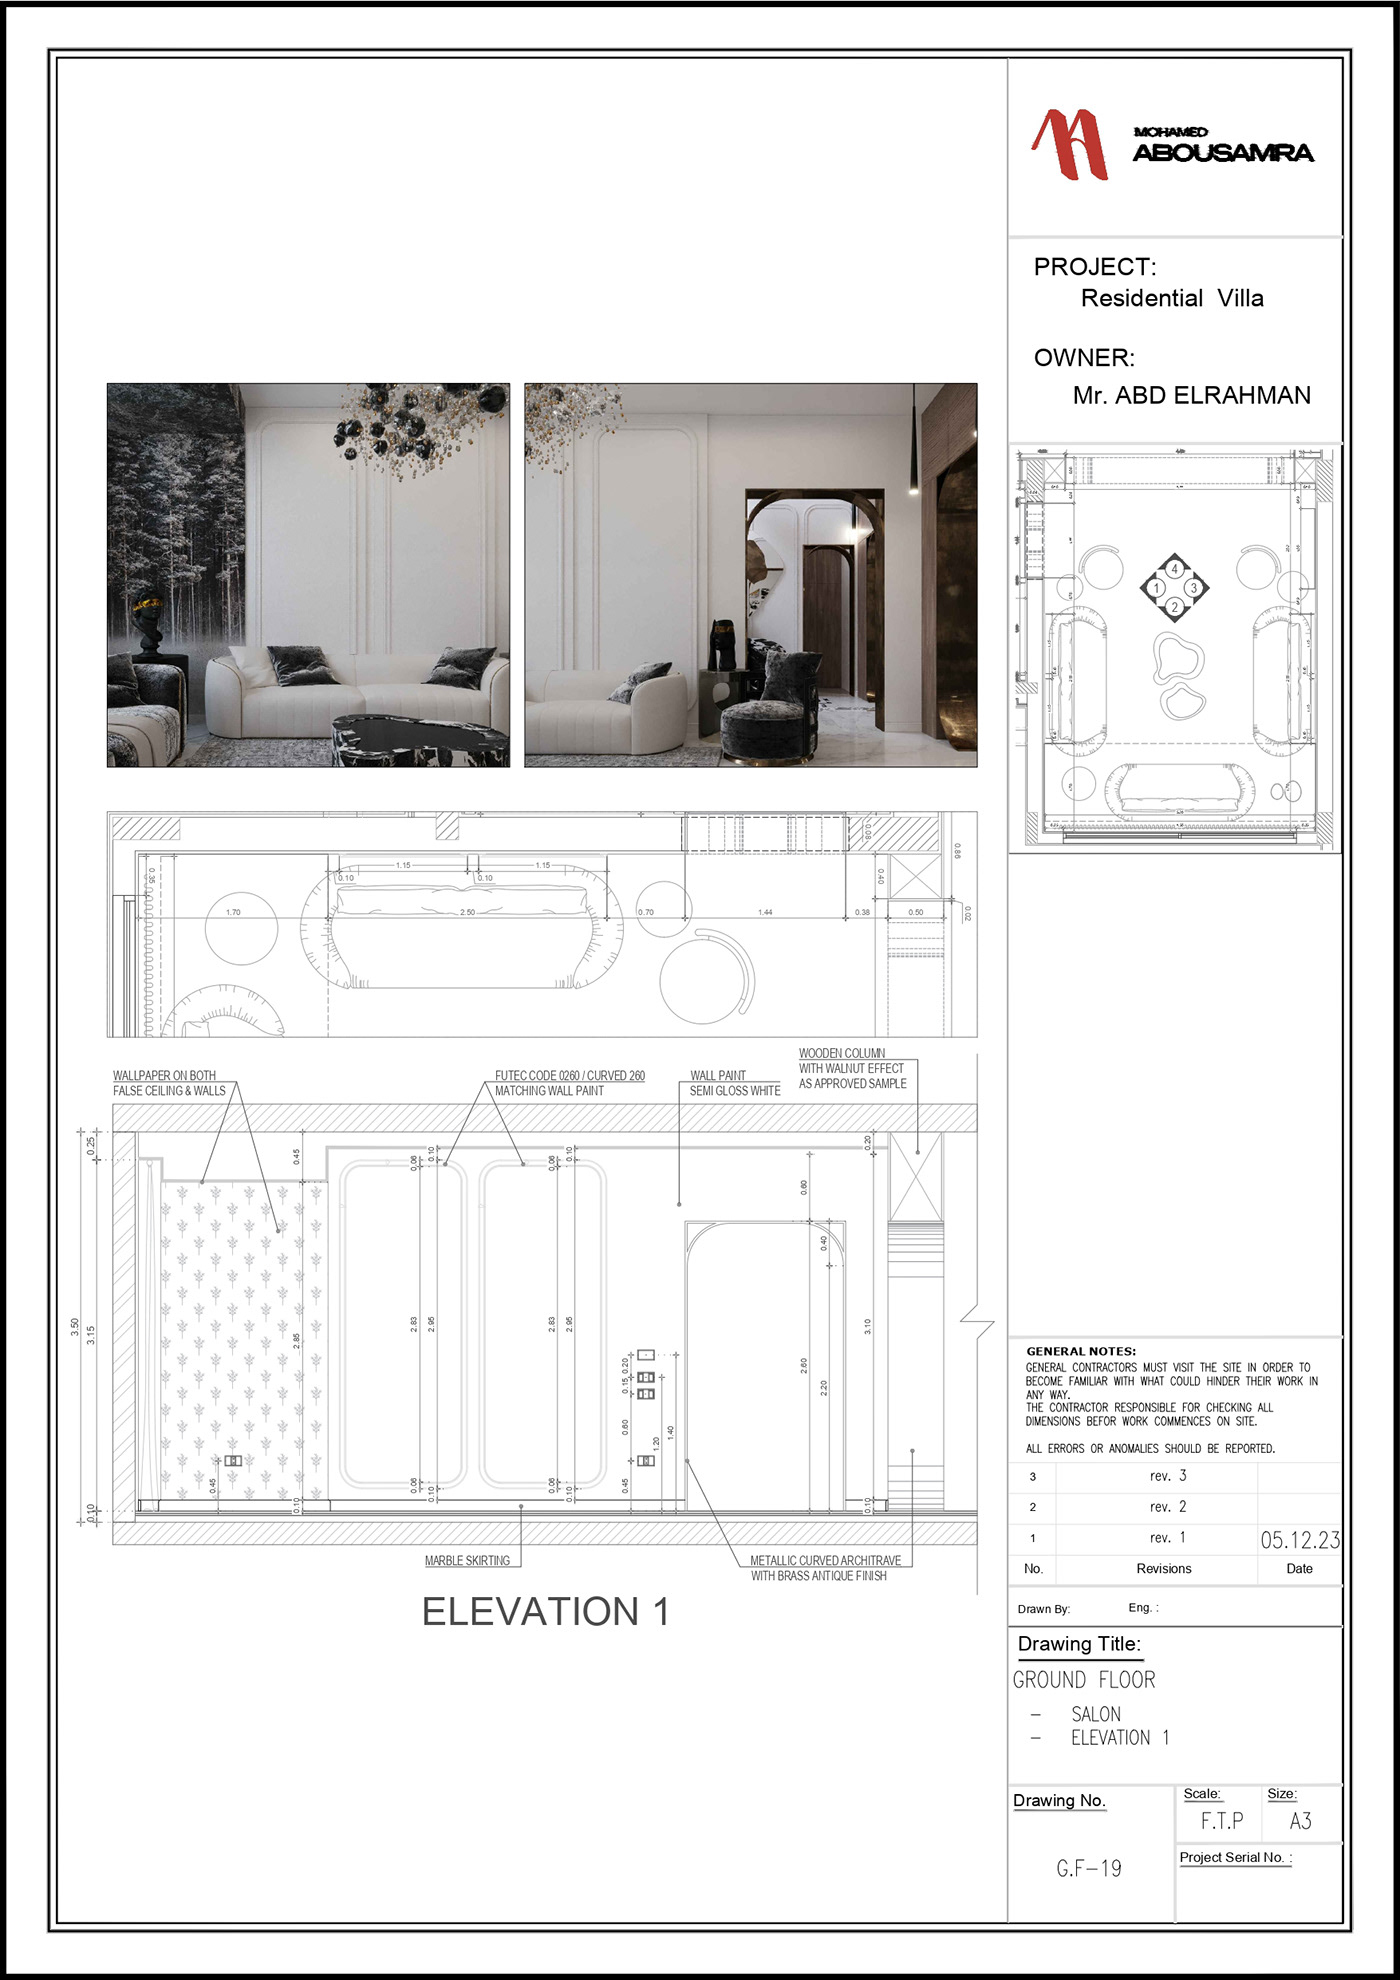 architecture interior design  working drawings Shop Drawings details Drawing  modern Interior indoor visualization